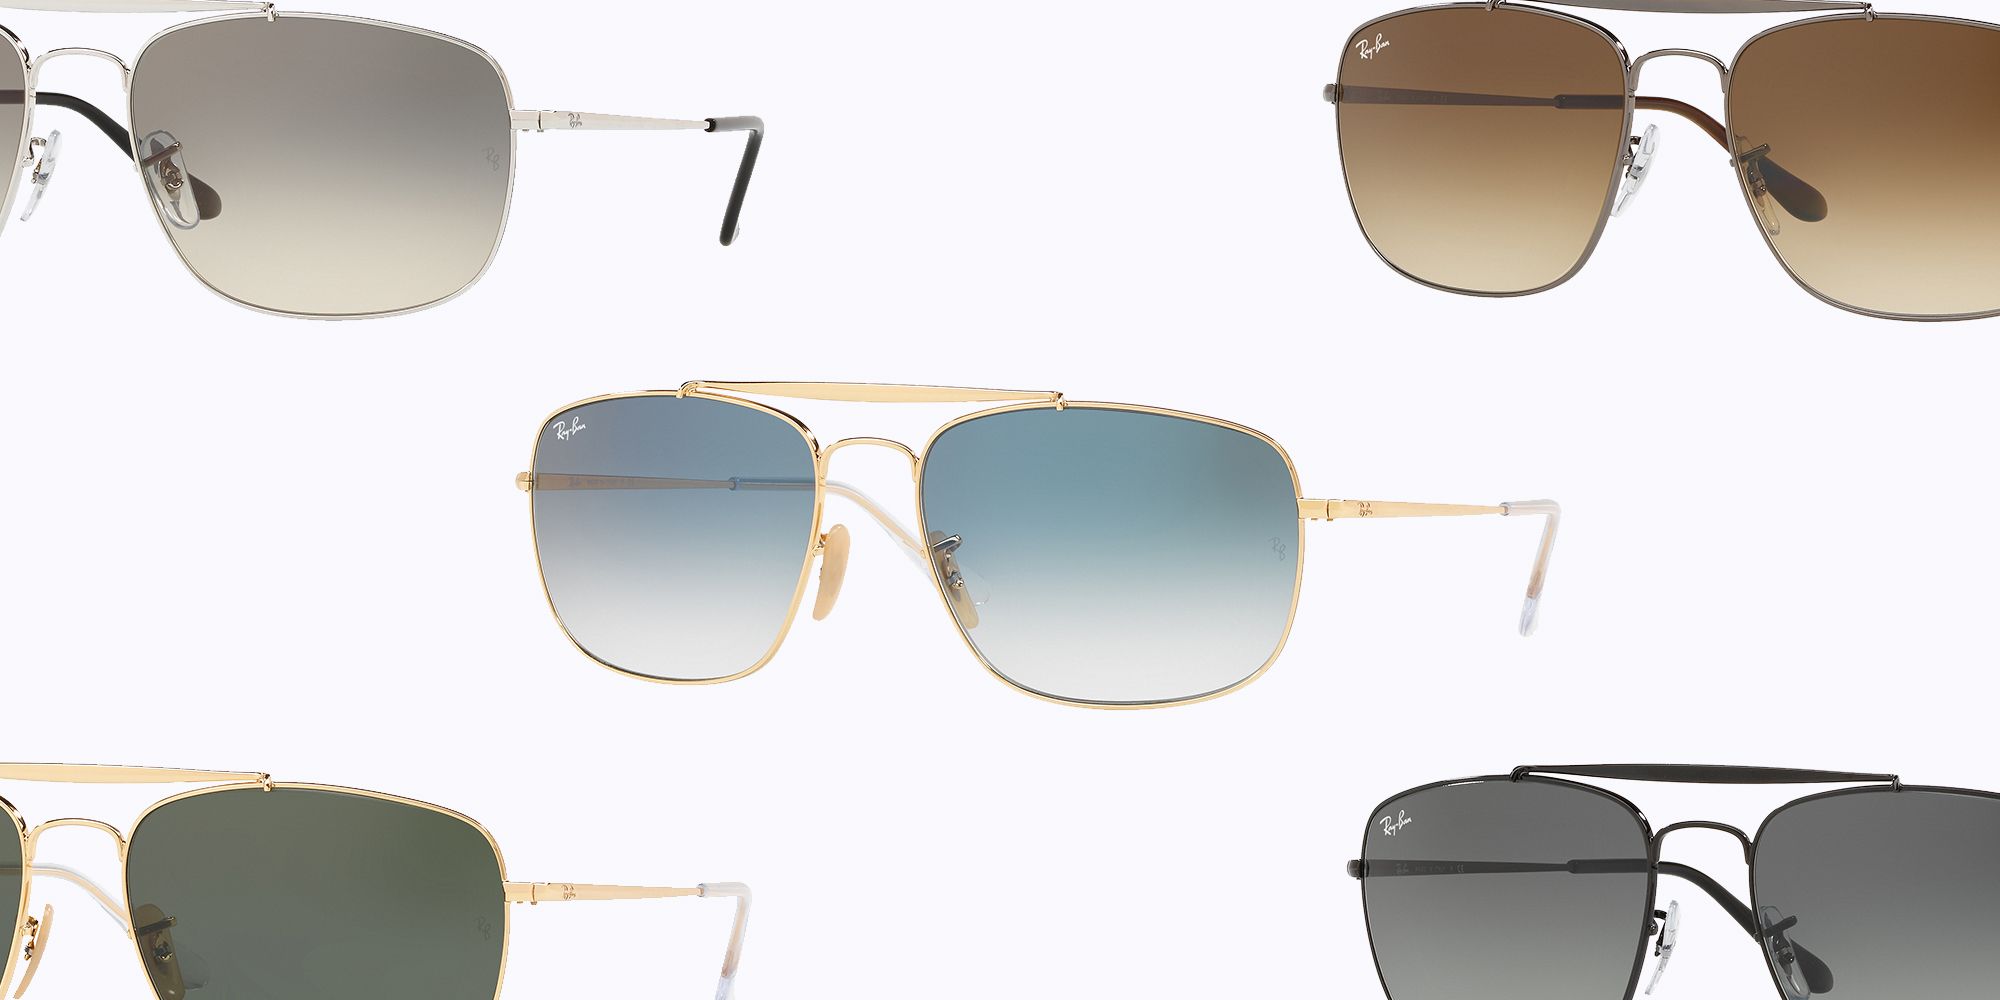 Finally, a Non-Aviator Ray-Ban Style That Truly Flatters Any Face Shape